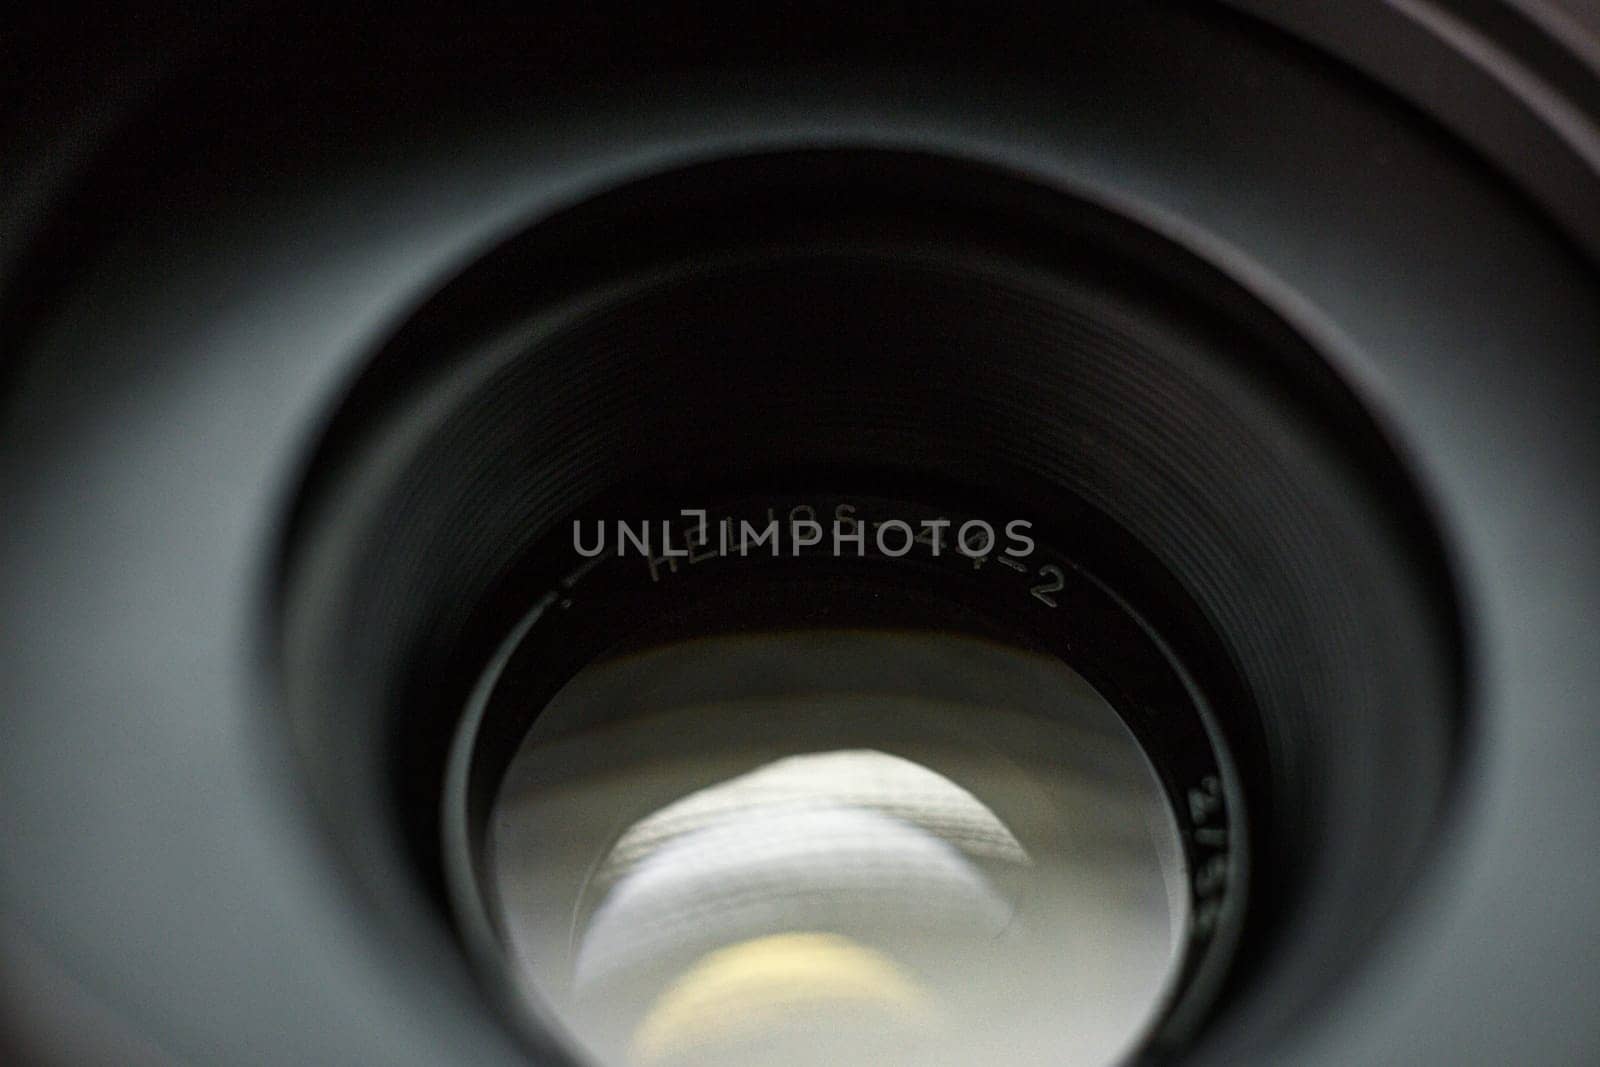 Interior view through Helios 44-2 lens, name engraved on inner ring, light reflection visible, capturing photography equipment intricacies by mosfet_ua